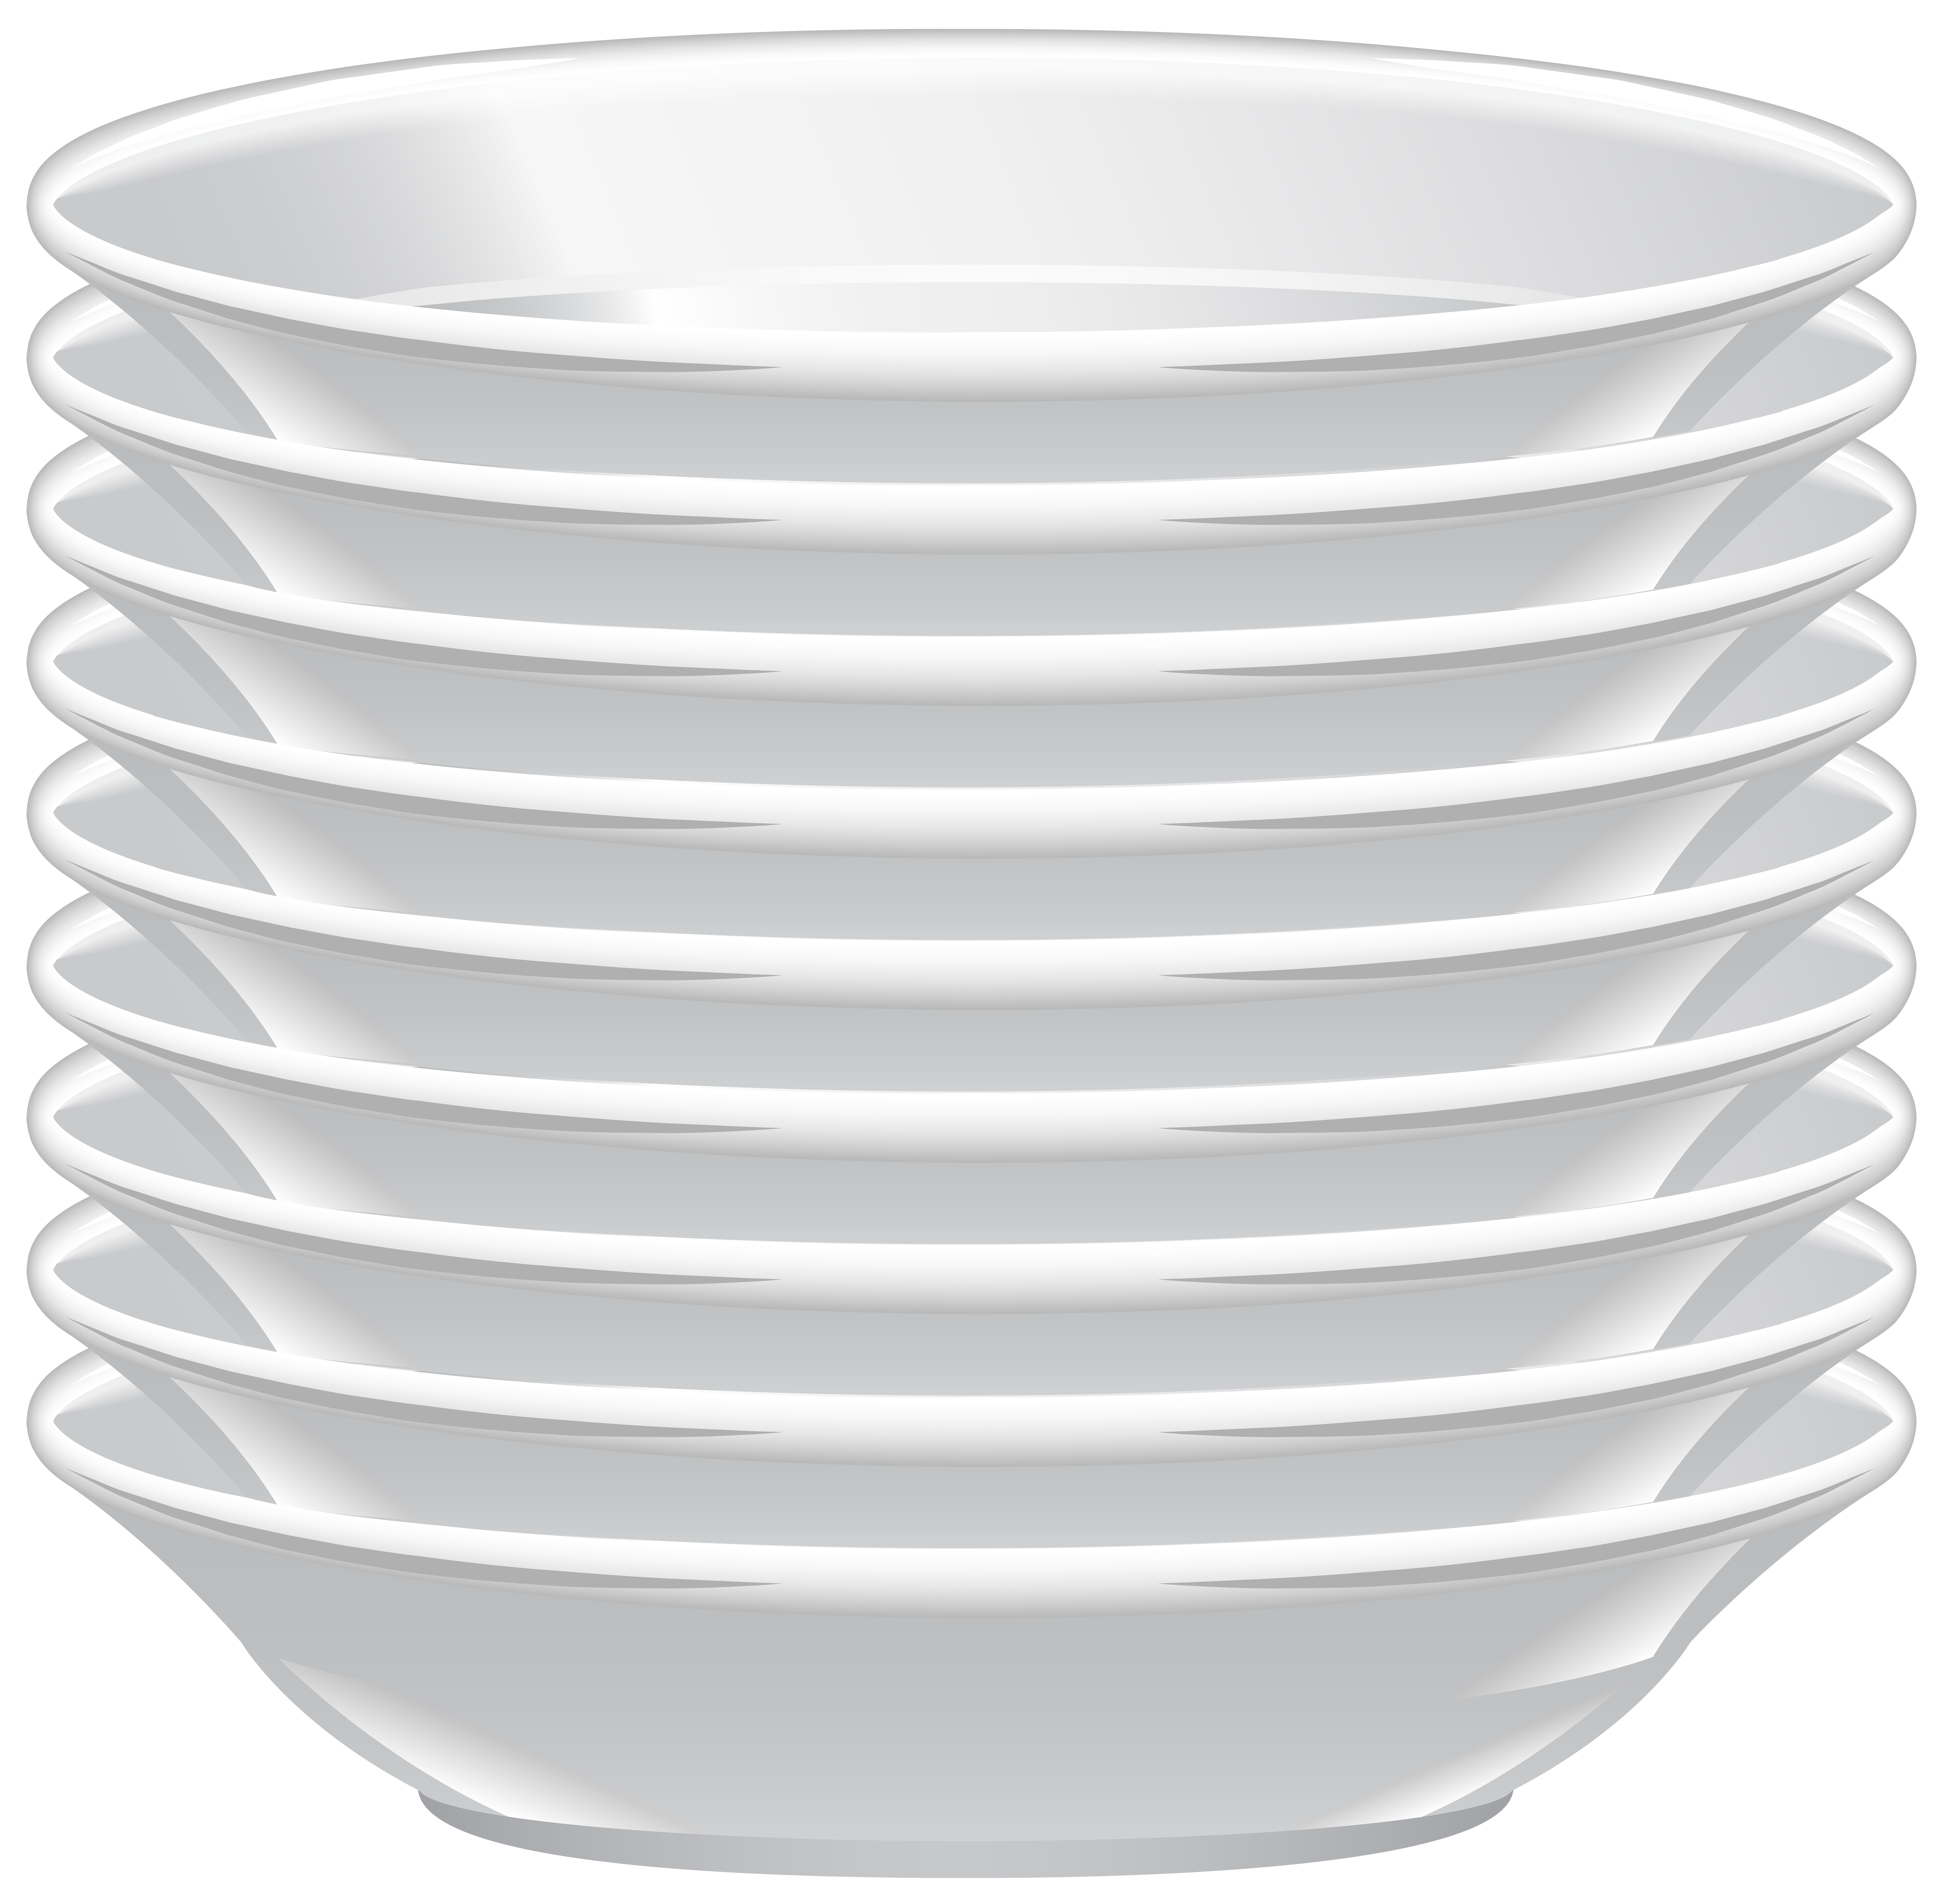 cup plate clipart - photo #41